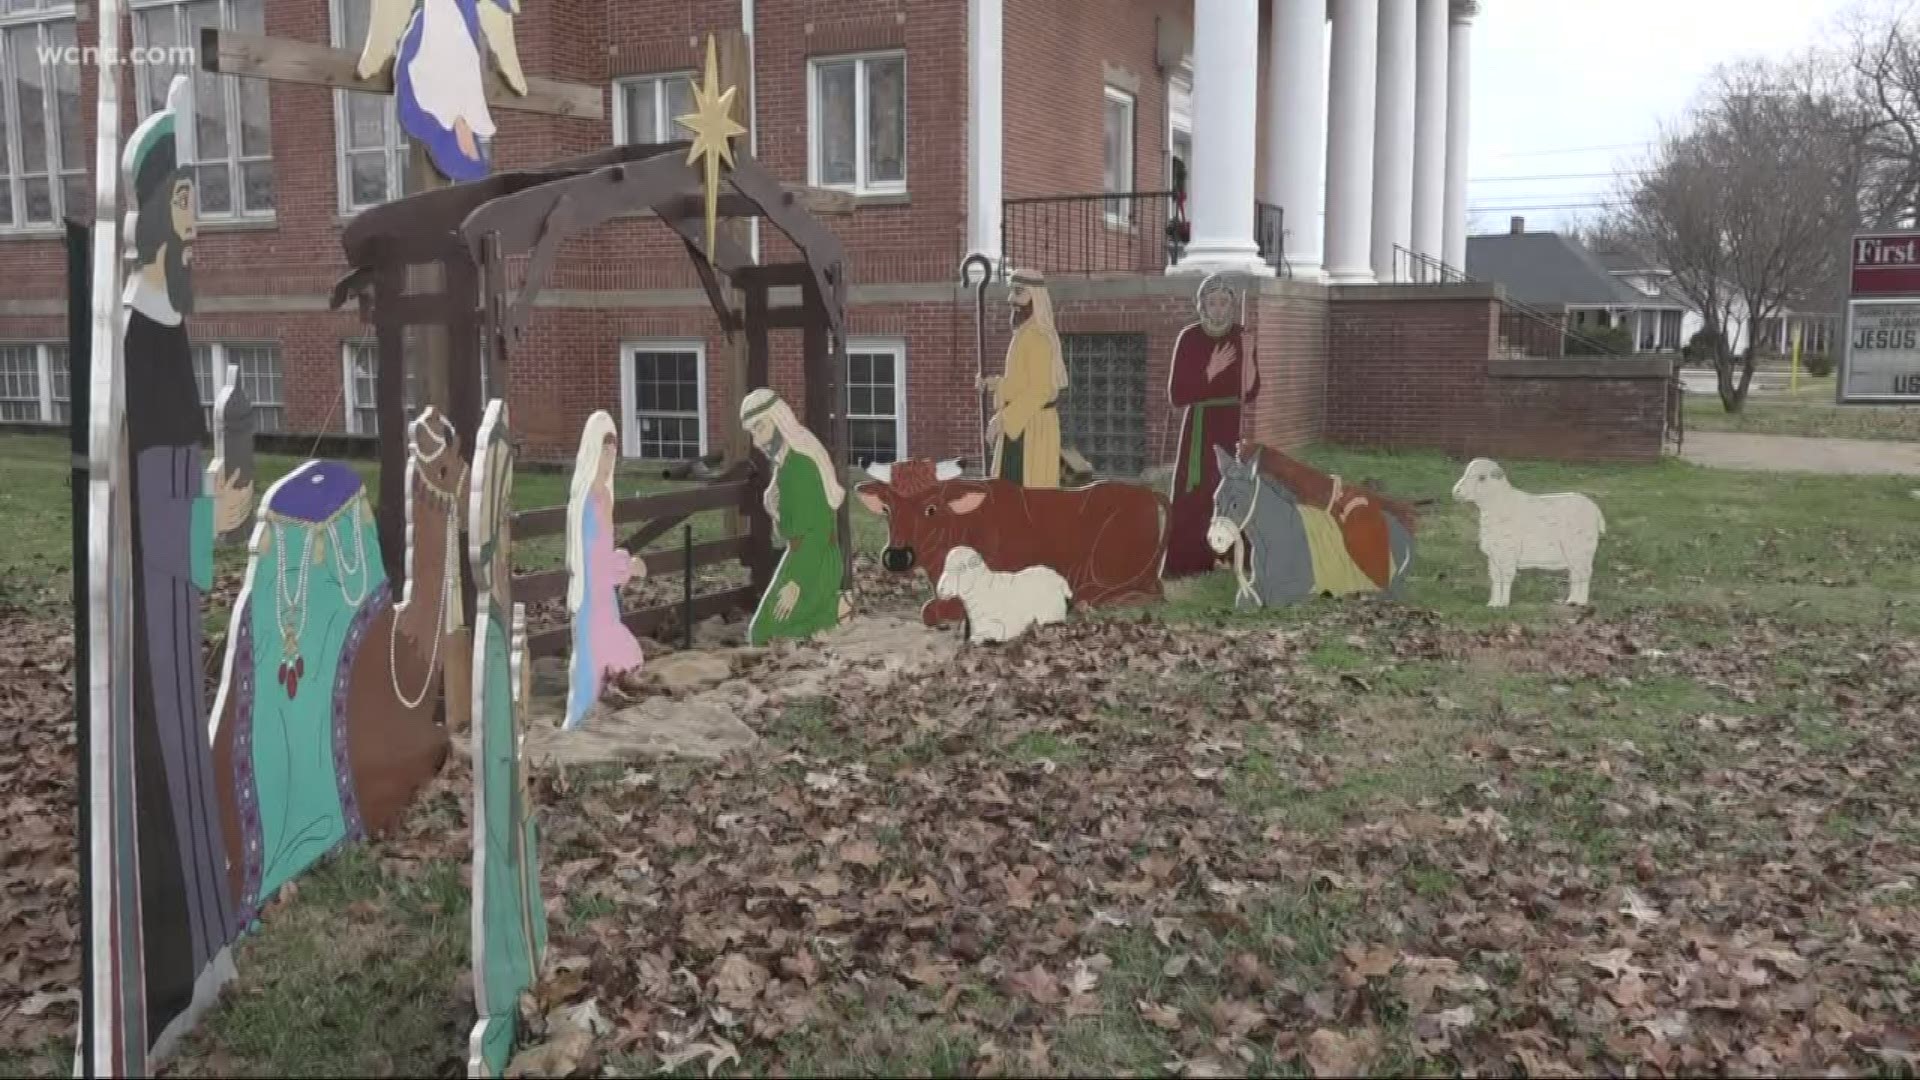 The nativity scene was set out at First Baptist Church of Lowell on the first Sunday in December. Two days later, baby Jesus and the manger were gone.